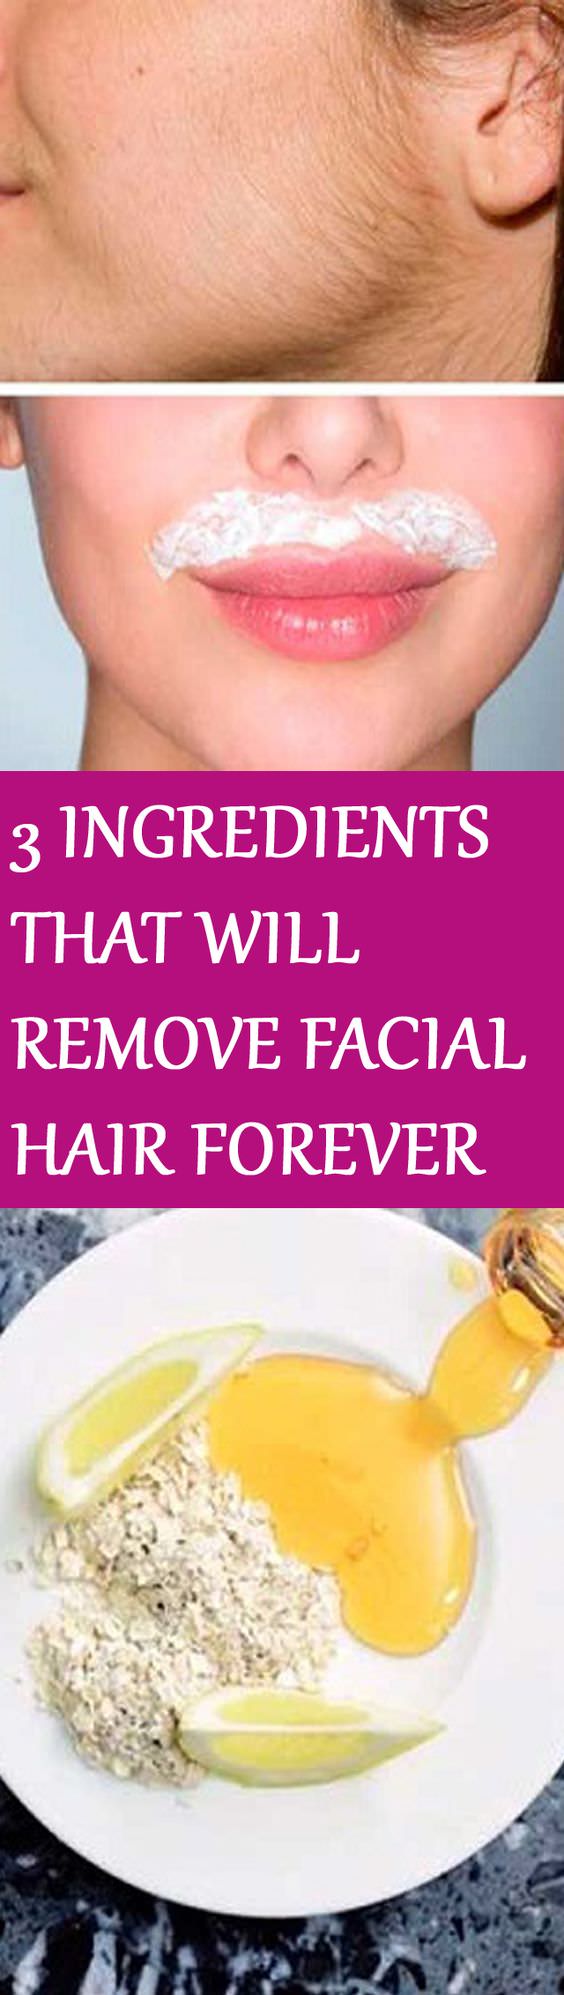 Facing the problem of having facial hair? Try this NATURAL recipe! Don't forget the unwanted excess hair on your face can make you look unattractive!